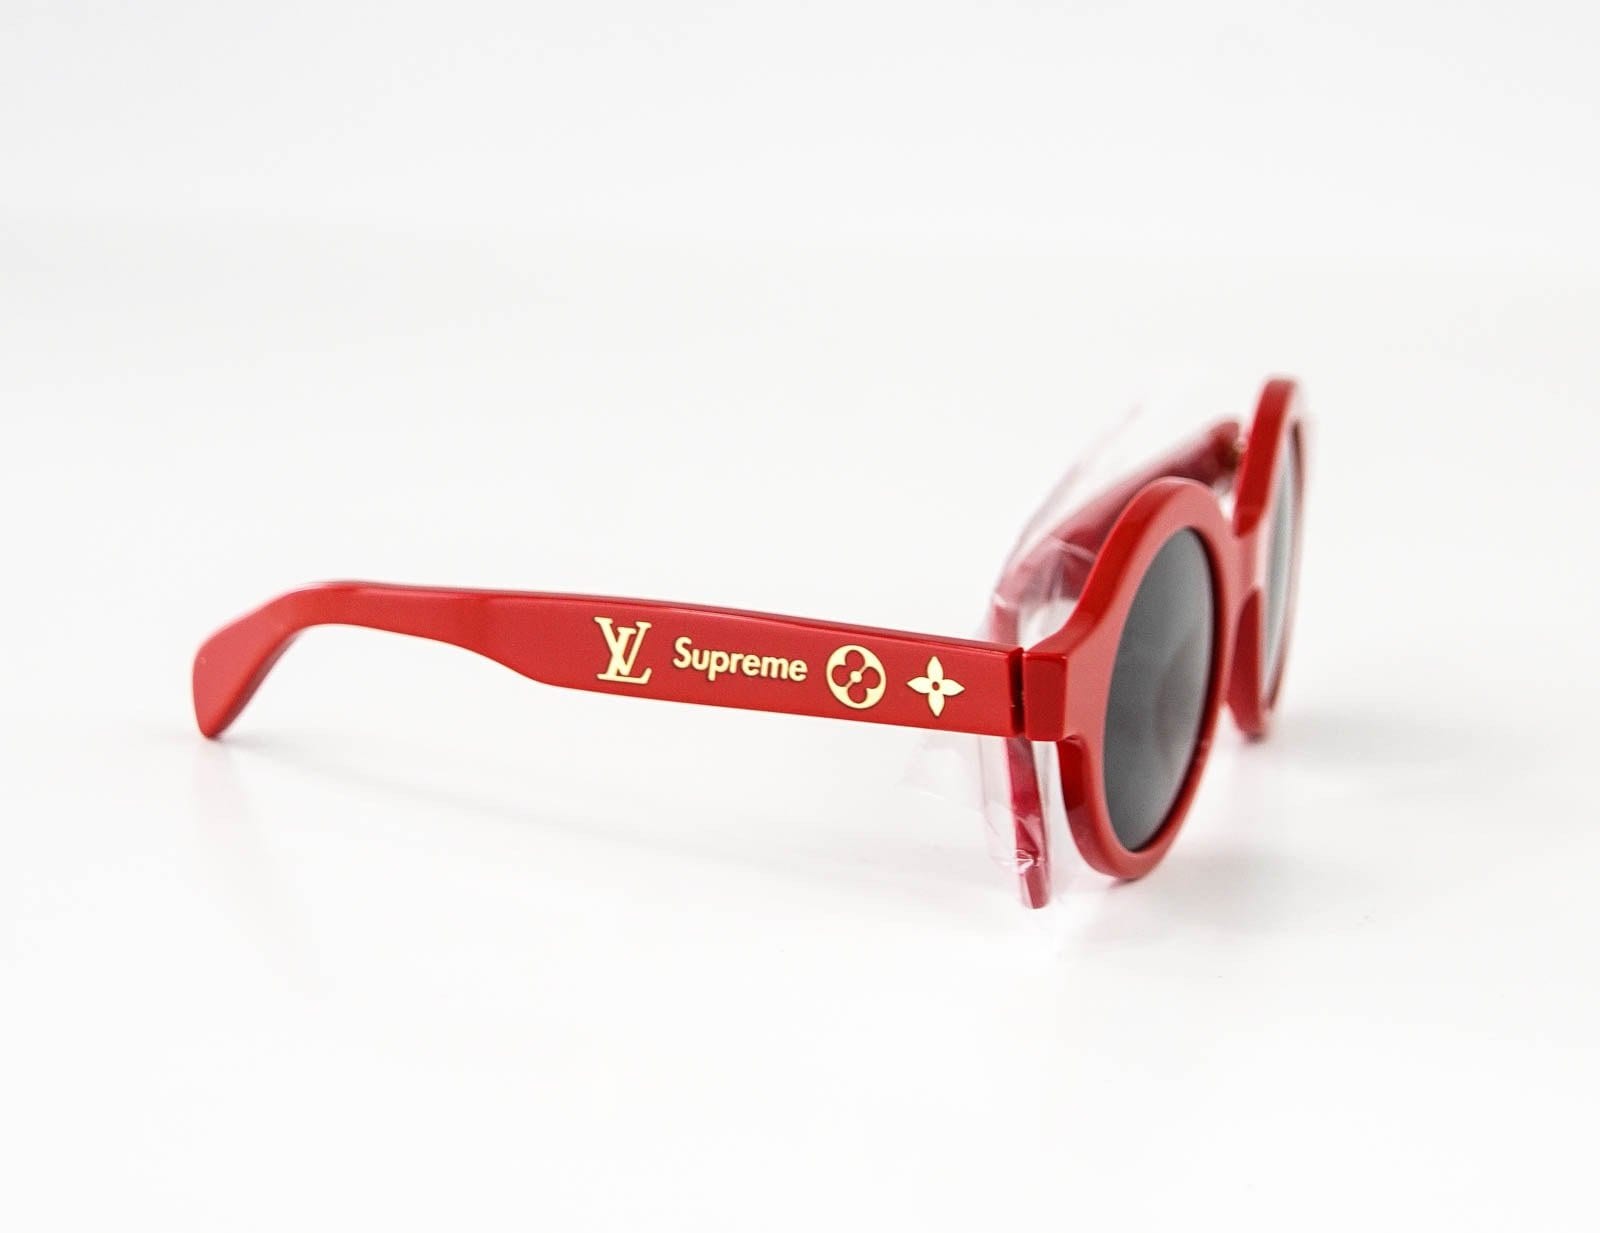 red louis vuitton glasses